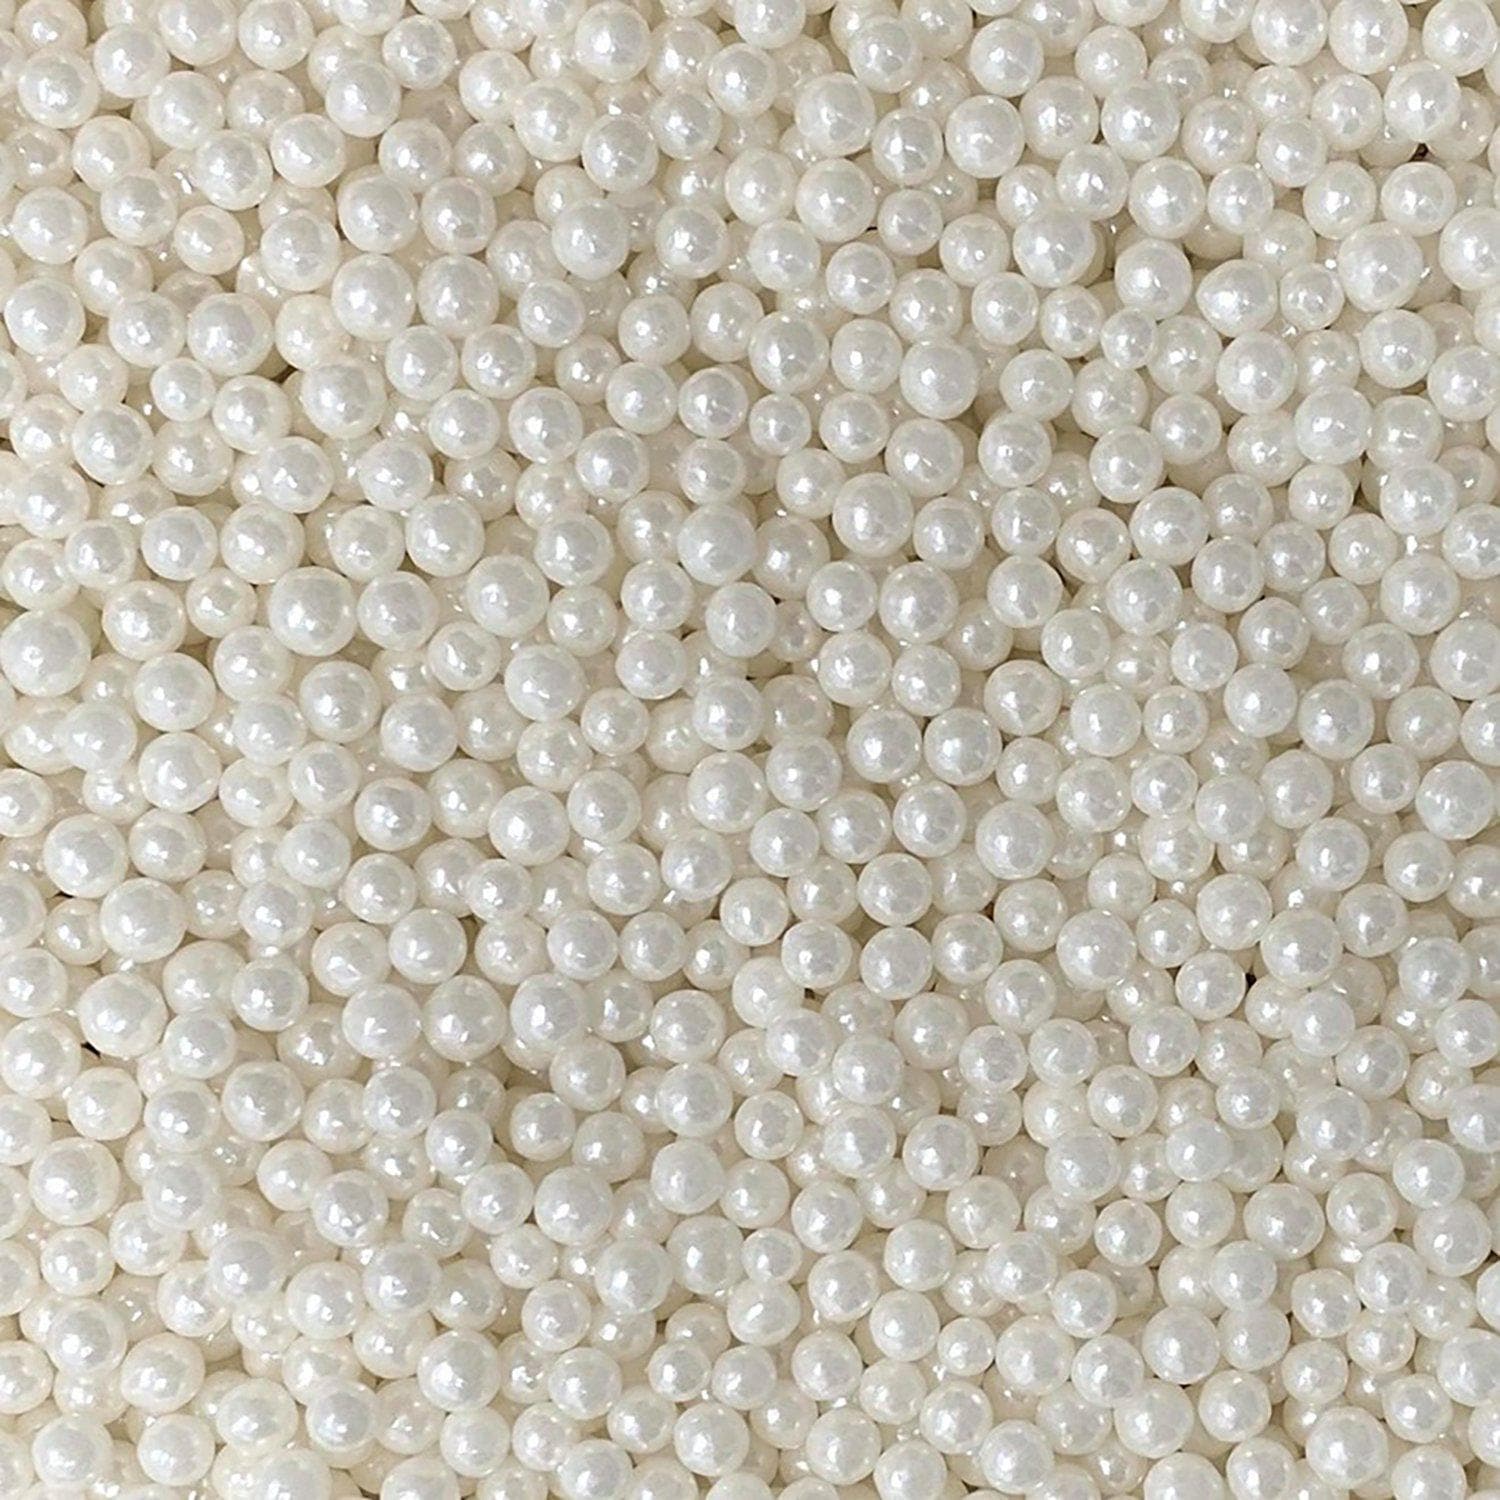 20MM White Pearl Beads 15 With 3.5-4MM Hole